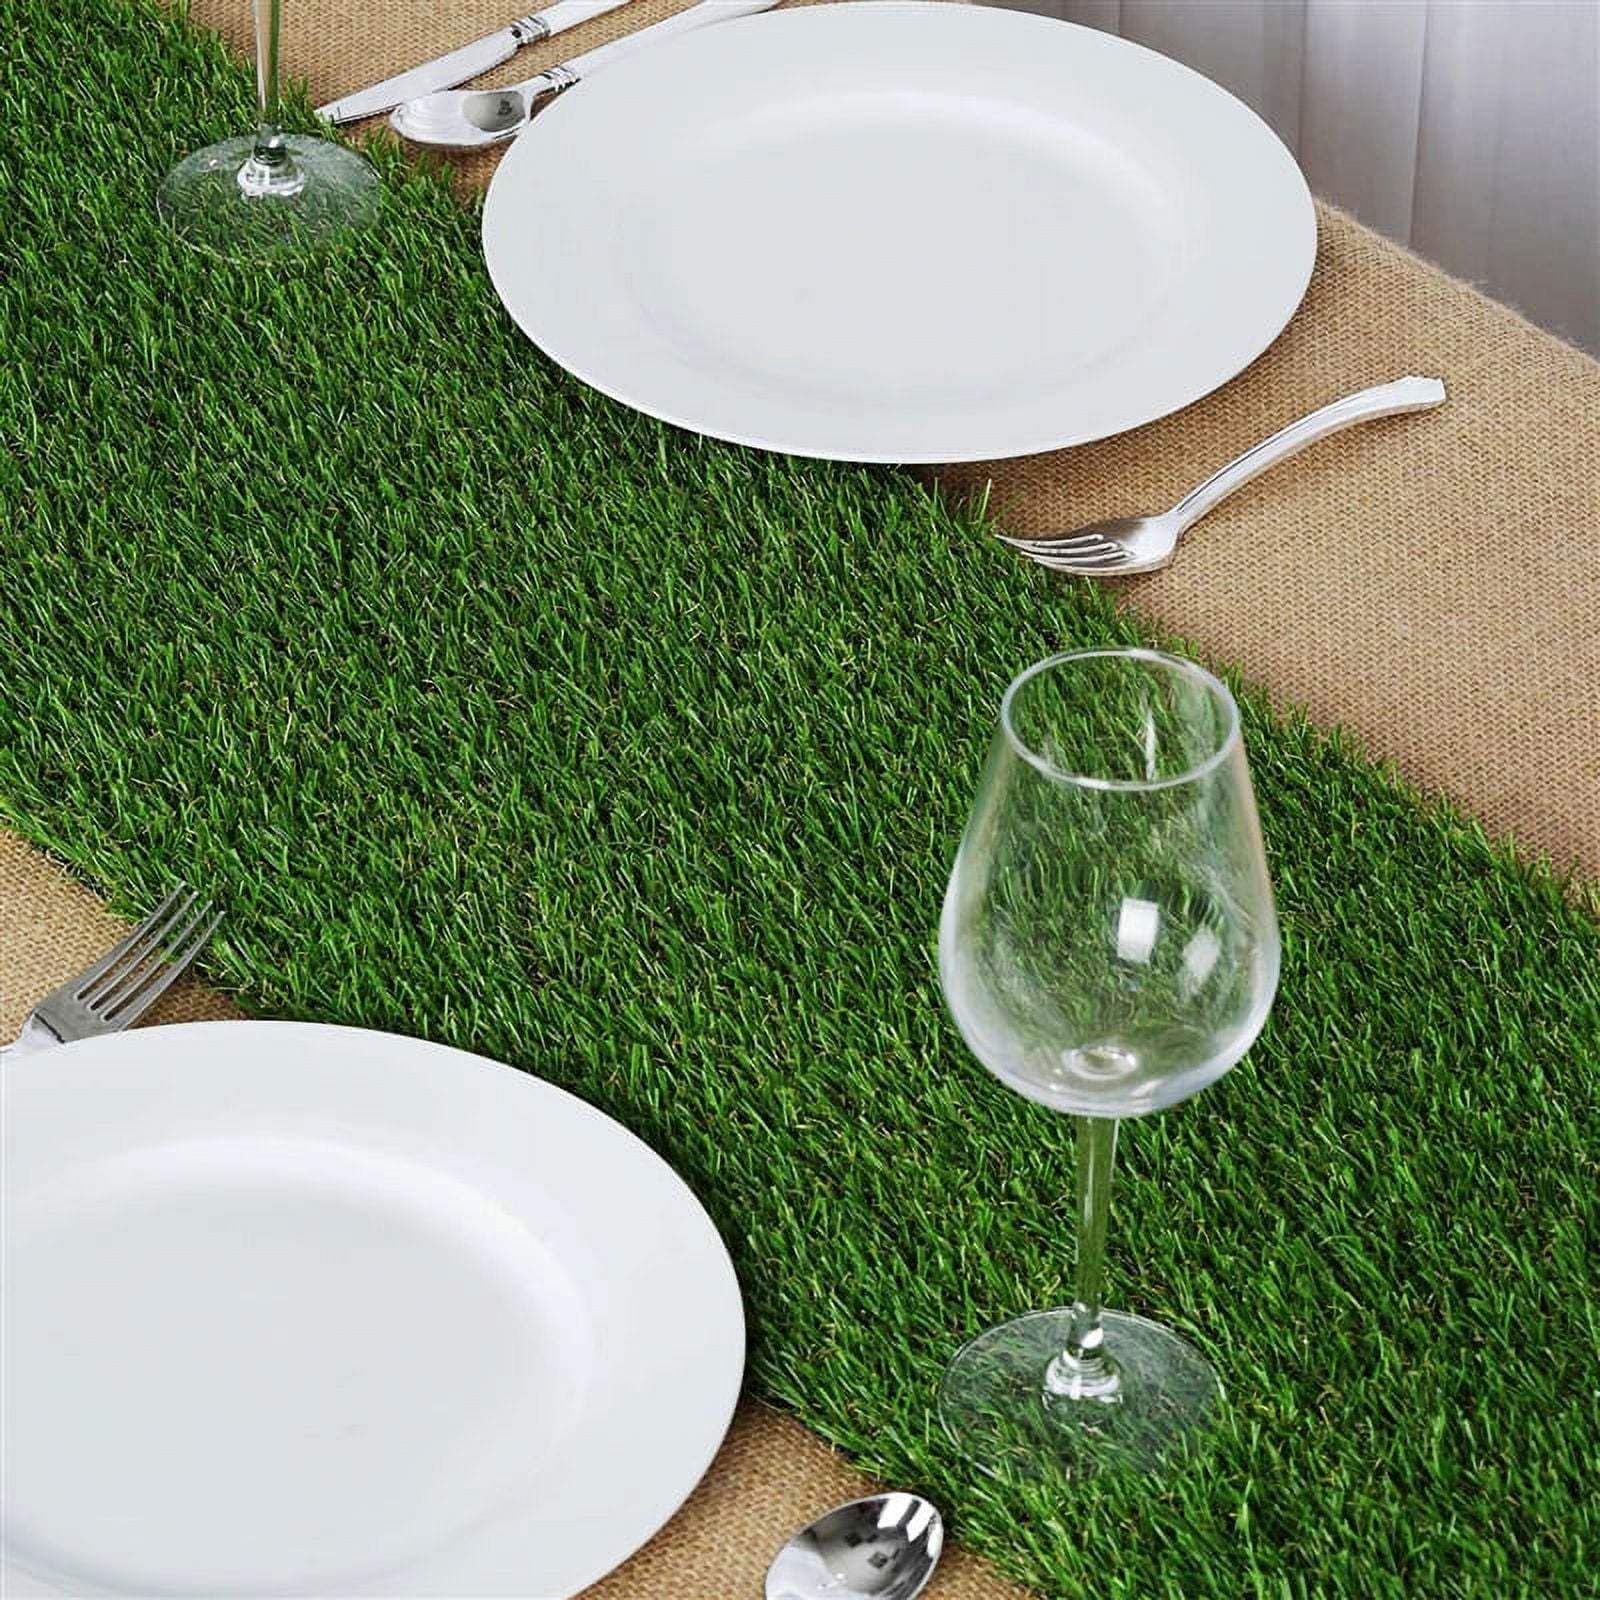  Hooqict Artificial Grass Table Runner 12 x 72 Inch Reusable  Fake Grass Table Runner Green Faux Grass Table Decorations for Wedding  Birthday Party Baby Shower Banquet Spring Summer Tabletop Decor 